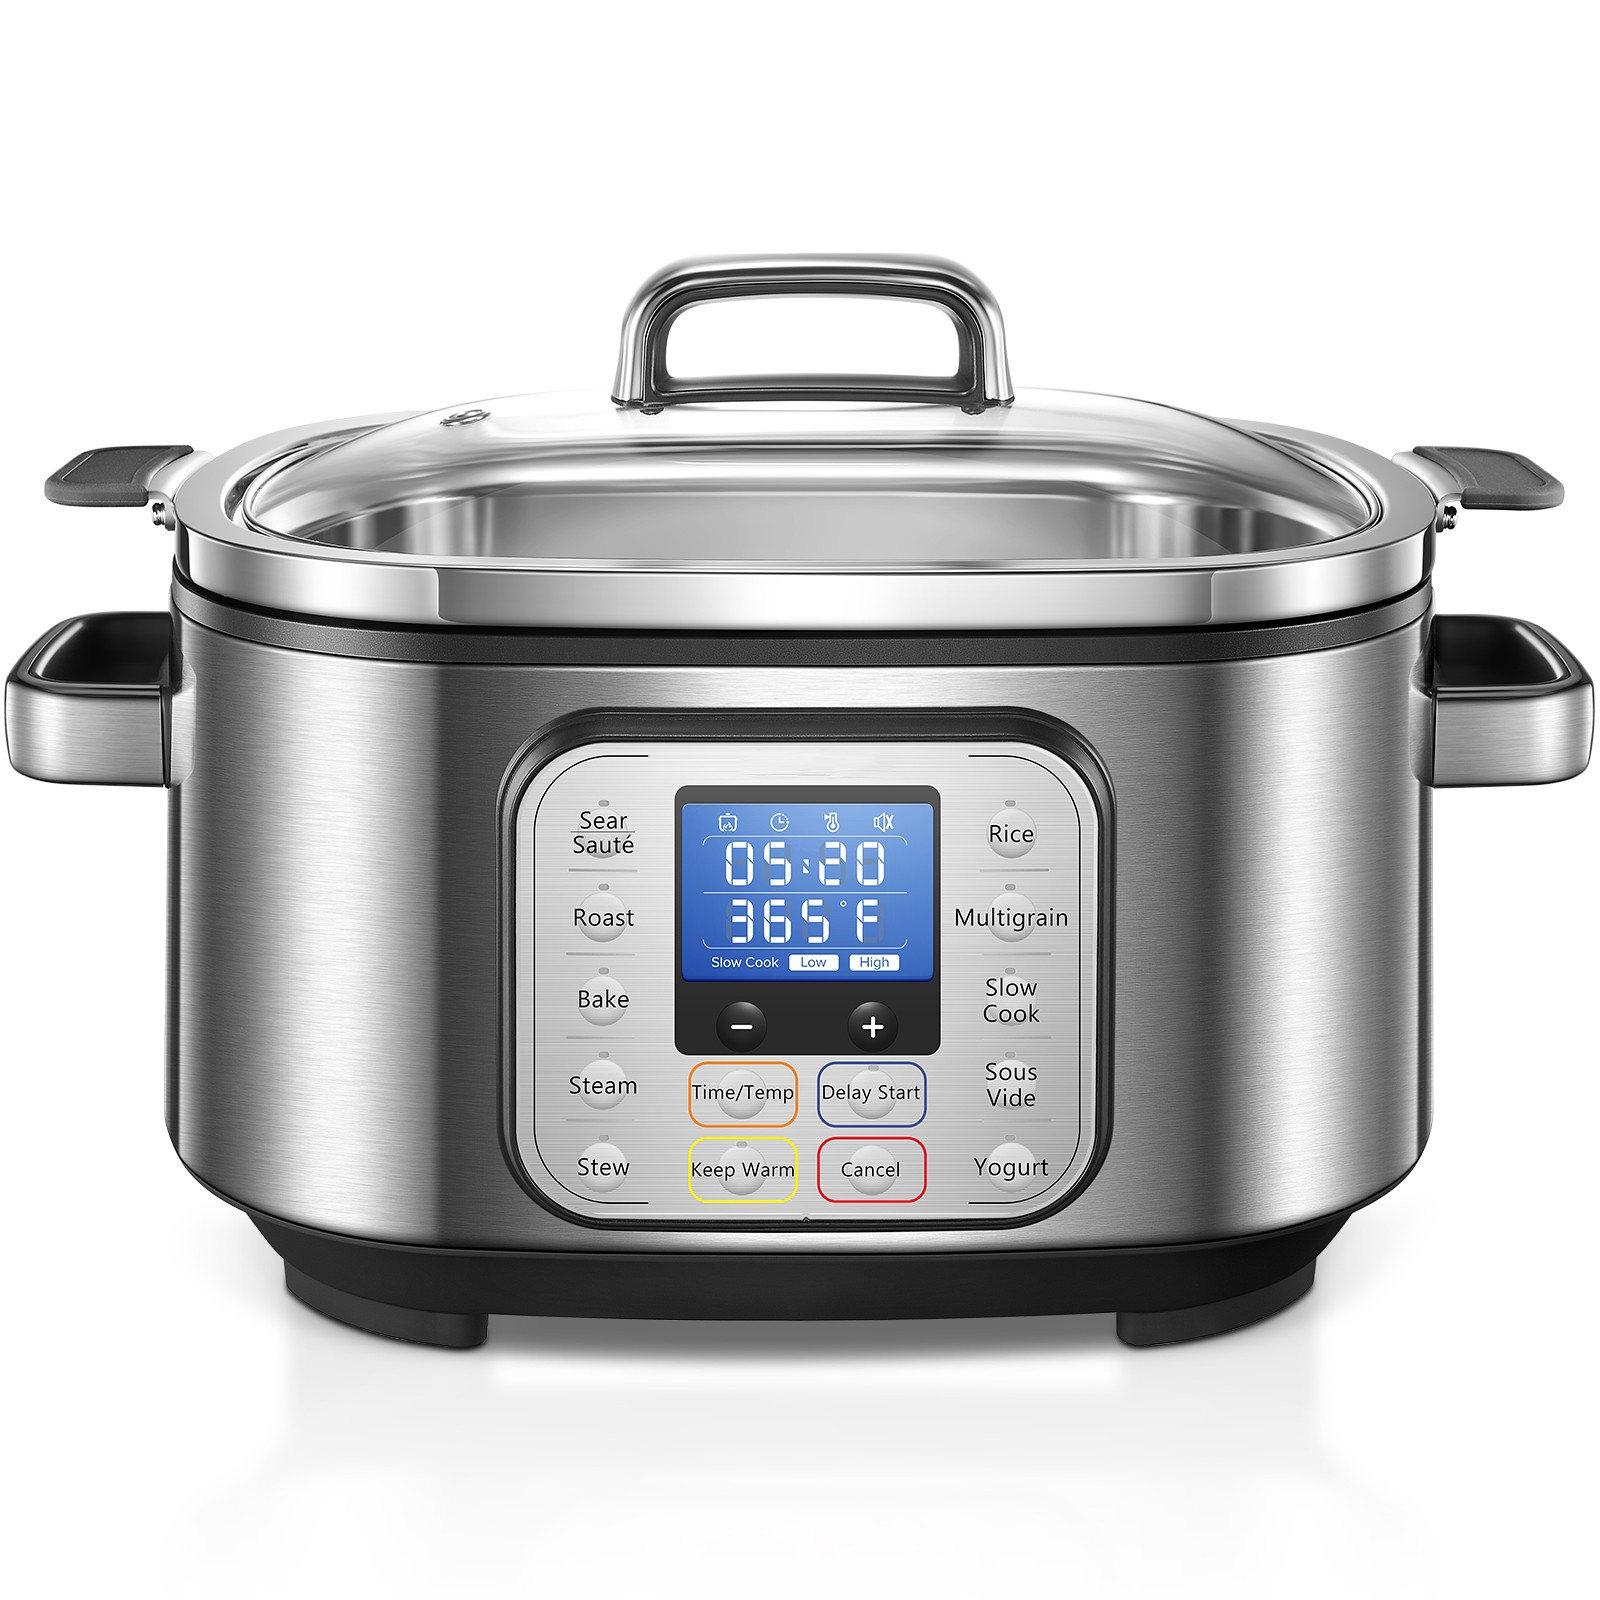 Slow Cooker, HOUSNAT 10 in 1 Programmable Cooker, 6Qt Stainless Steel, Rice Cooker, Yogurt Maker, Delay Start, Steaming Rack and Glass Lid, Adjustable Temp&Time for Slow Cook with Digital Timer - image 1 of 6